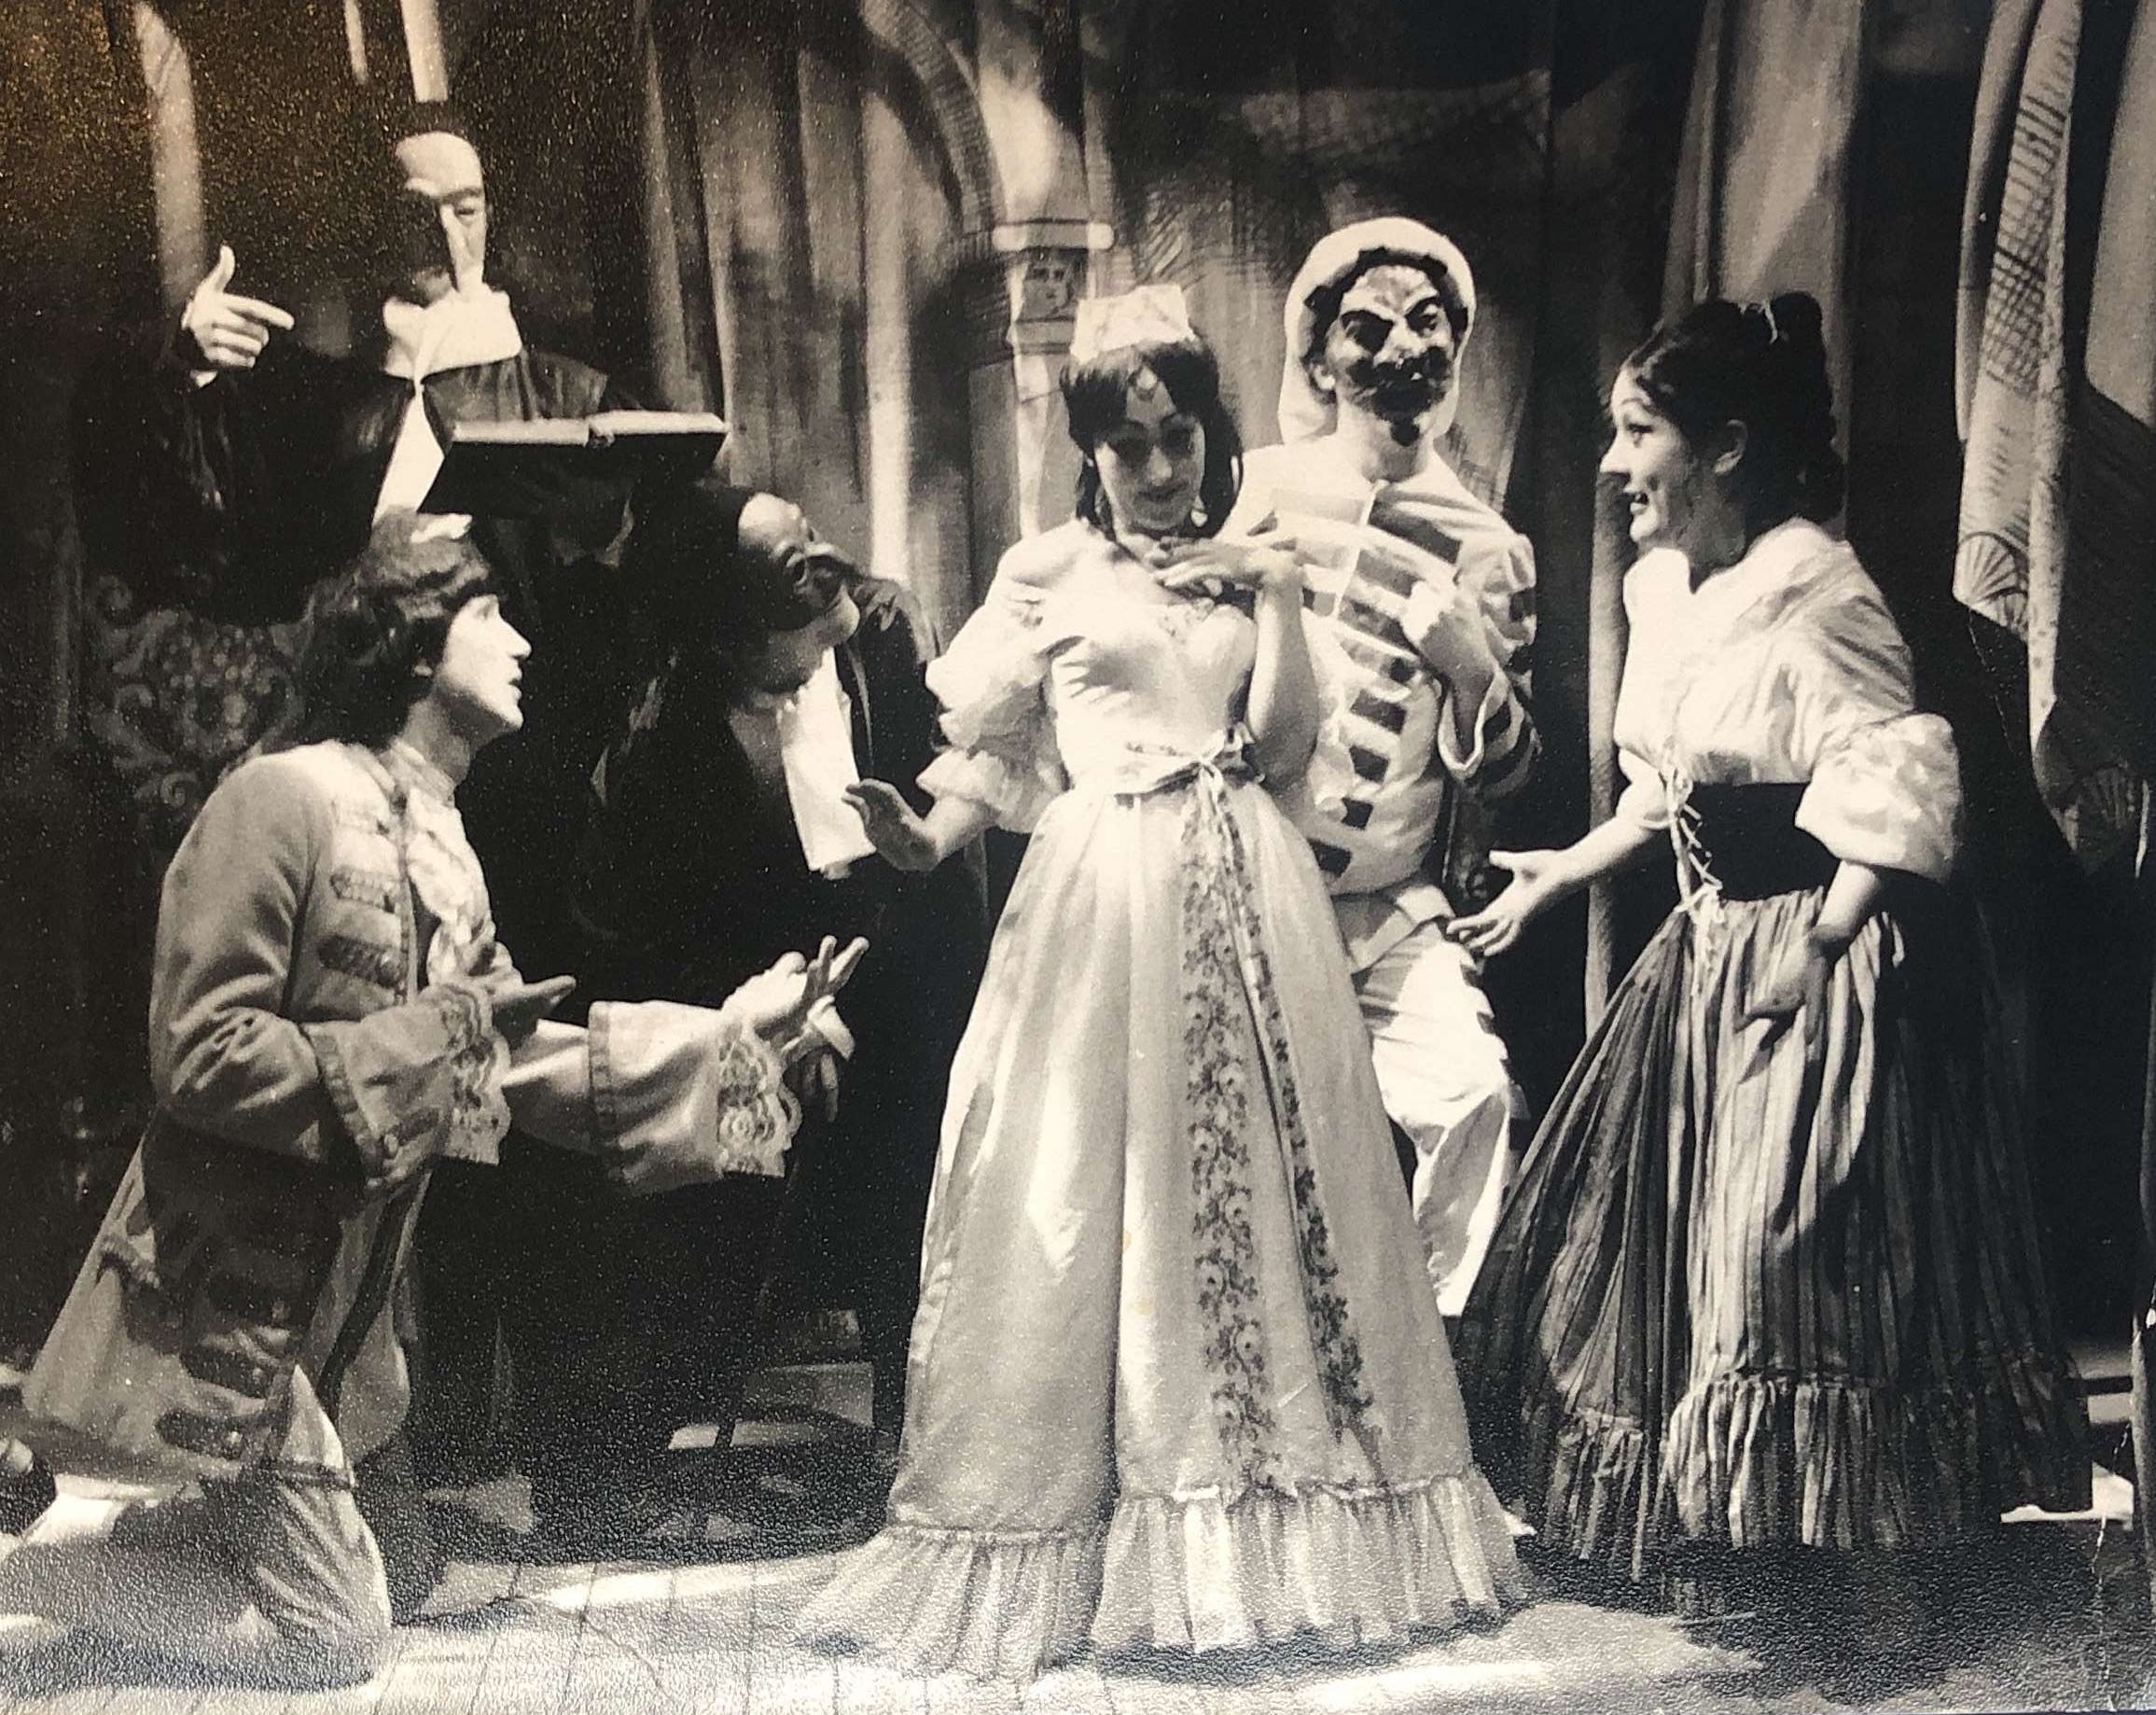 Lincoln Theatre Royal company In THE SERVANT OF TWO MASTERS by Carlo Goldoni, directed by Philip Hedley, 1968